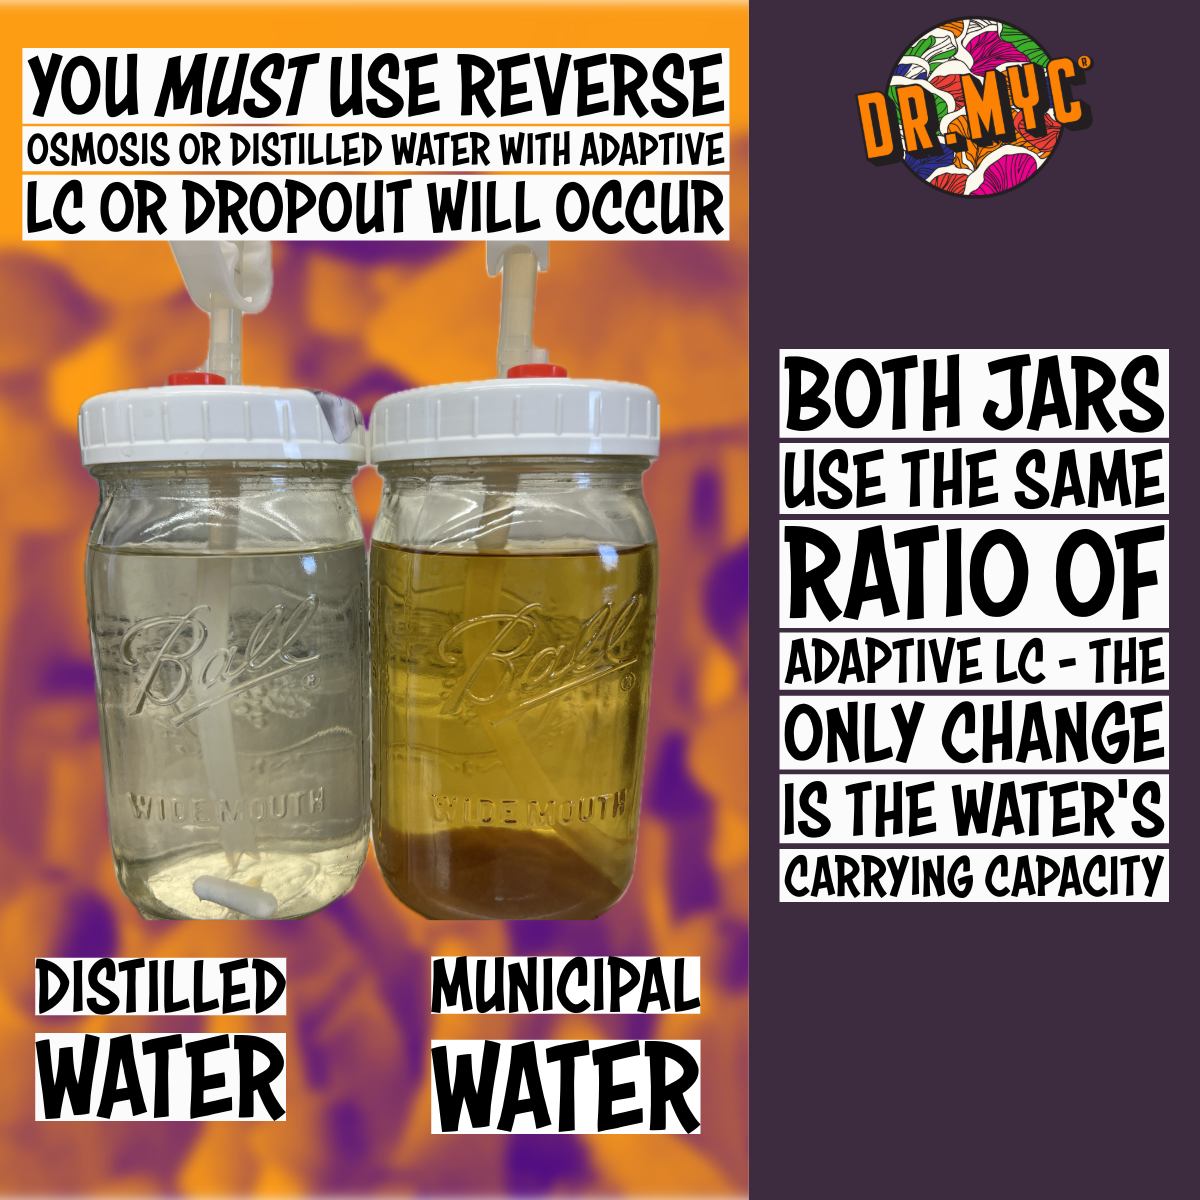 drmyc-adaptive-liquid-culture-water-type-municipal-ro-distilled-infographic.png